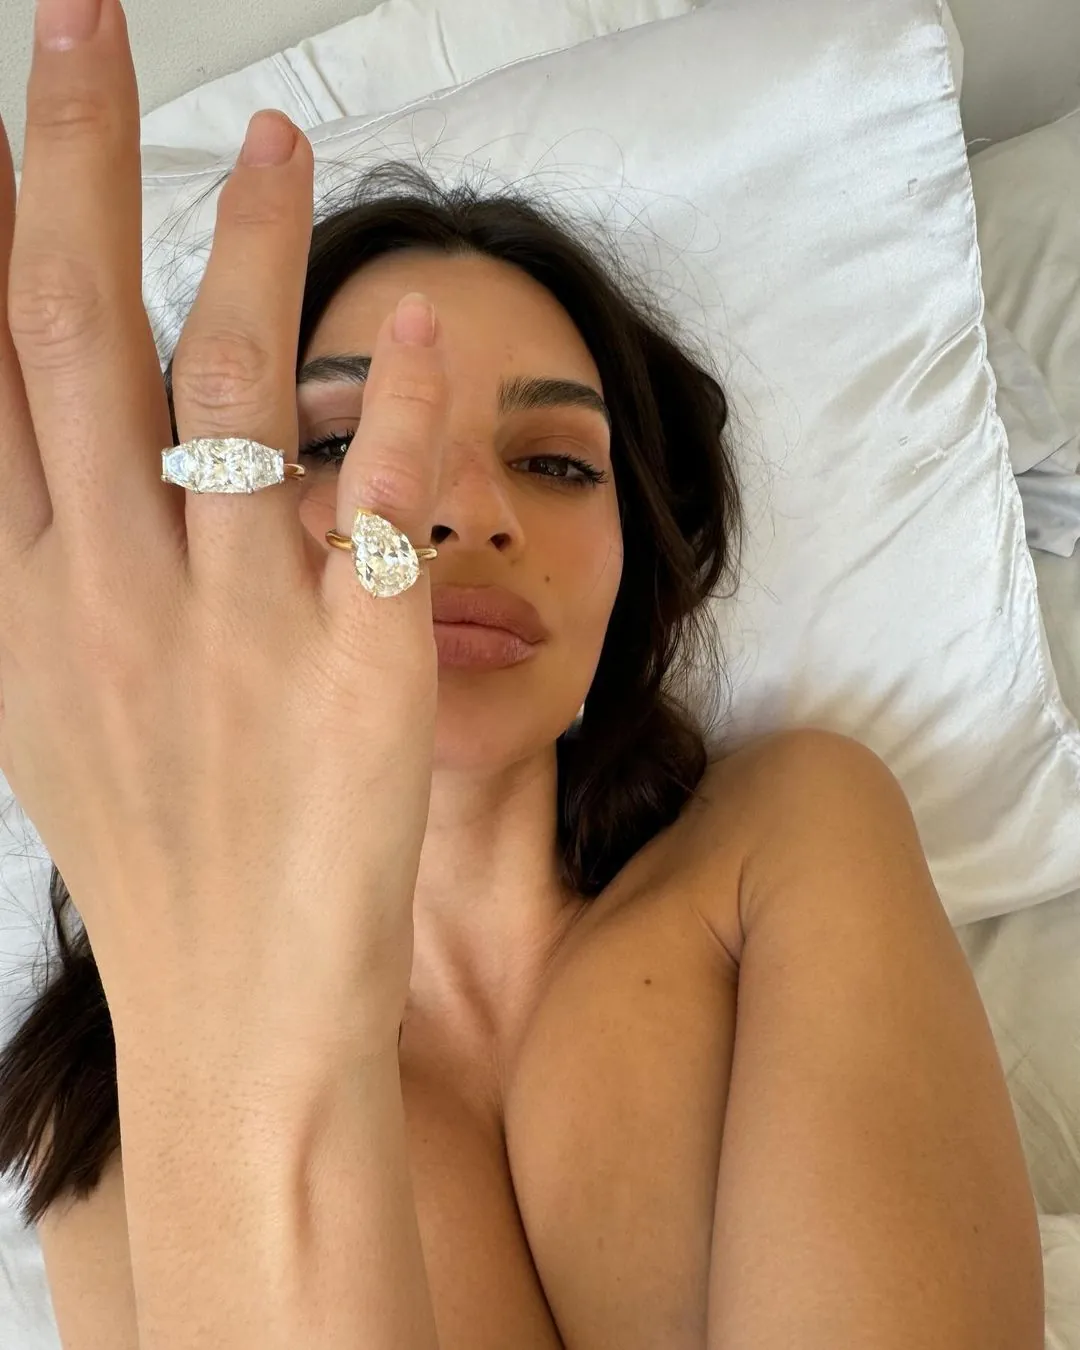 Emily Ratajkowski's Engagement Ring Turned Into a “Divorce Rings”